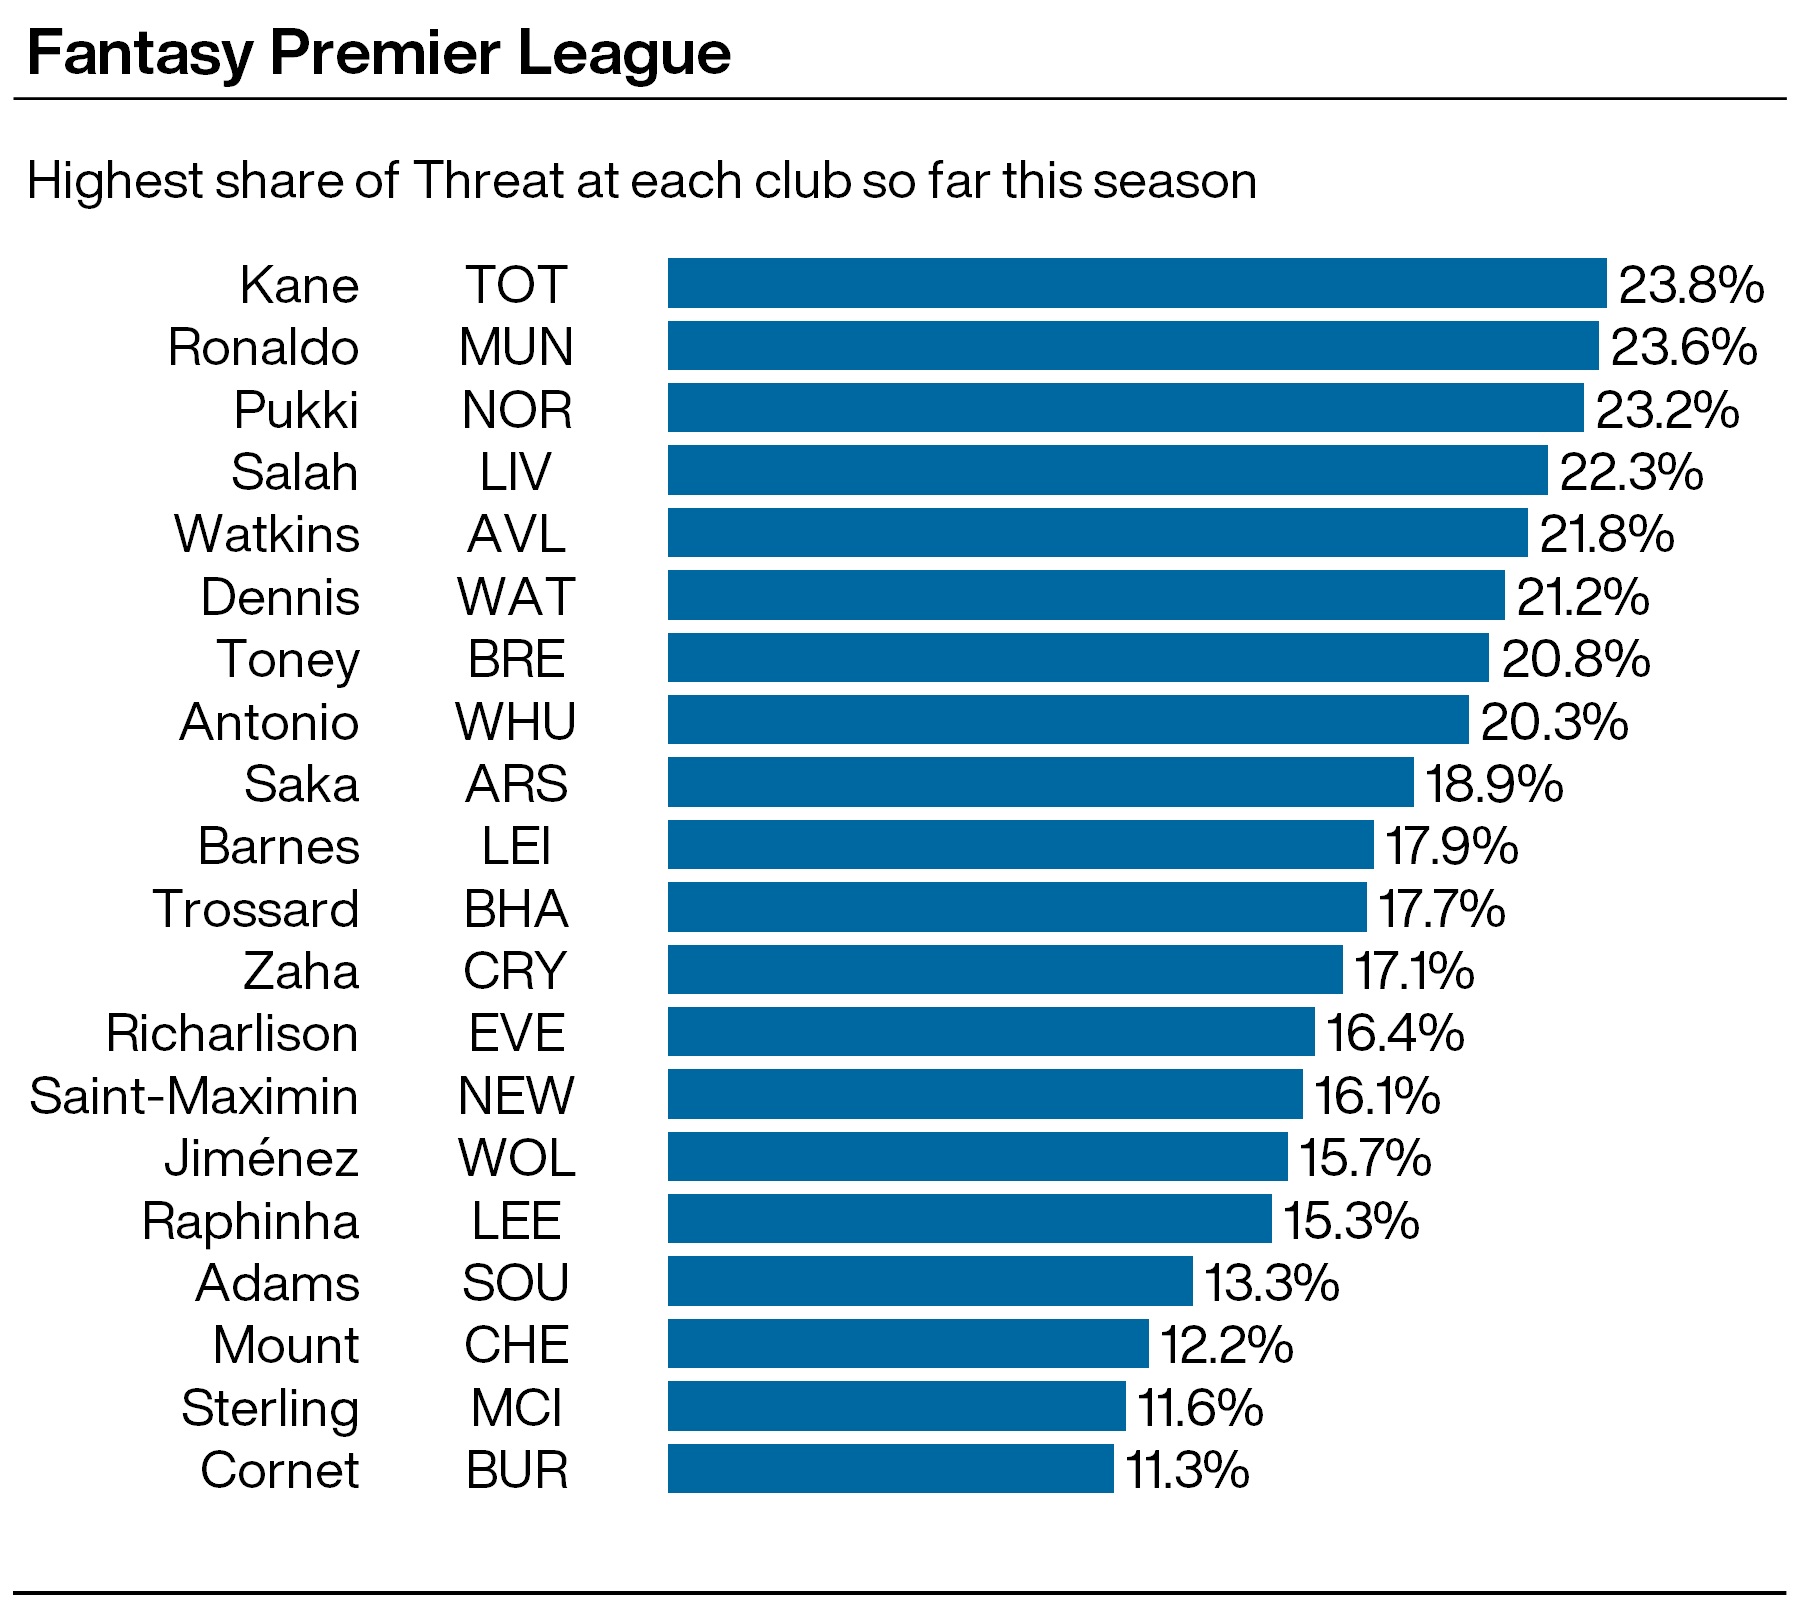 A graphic showing which players have the highest proportion of their team's Threat in the Premier League